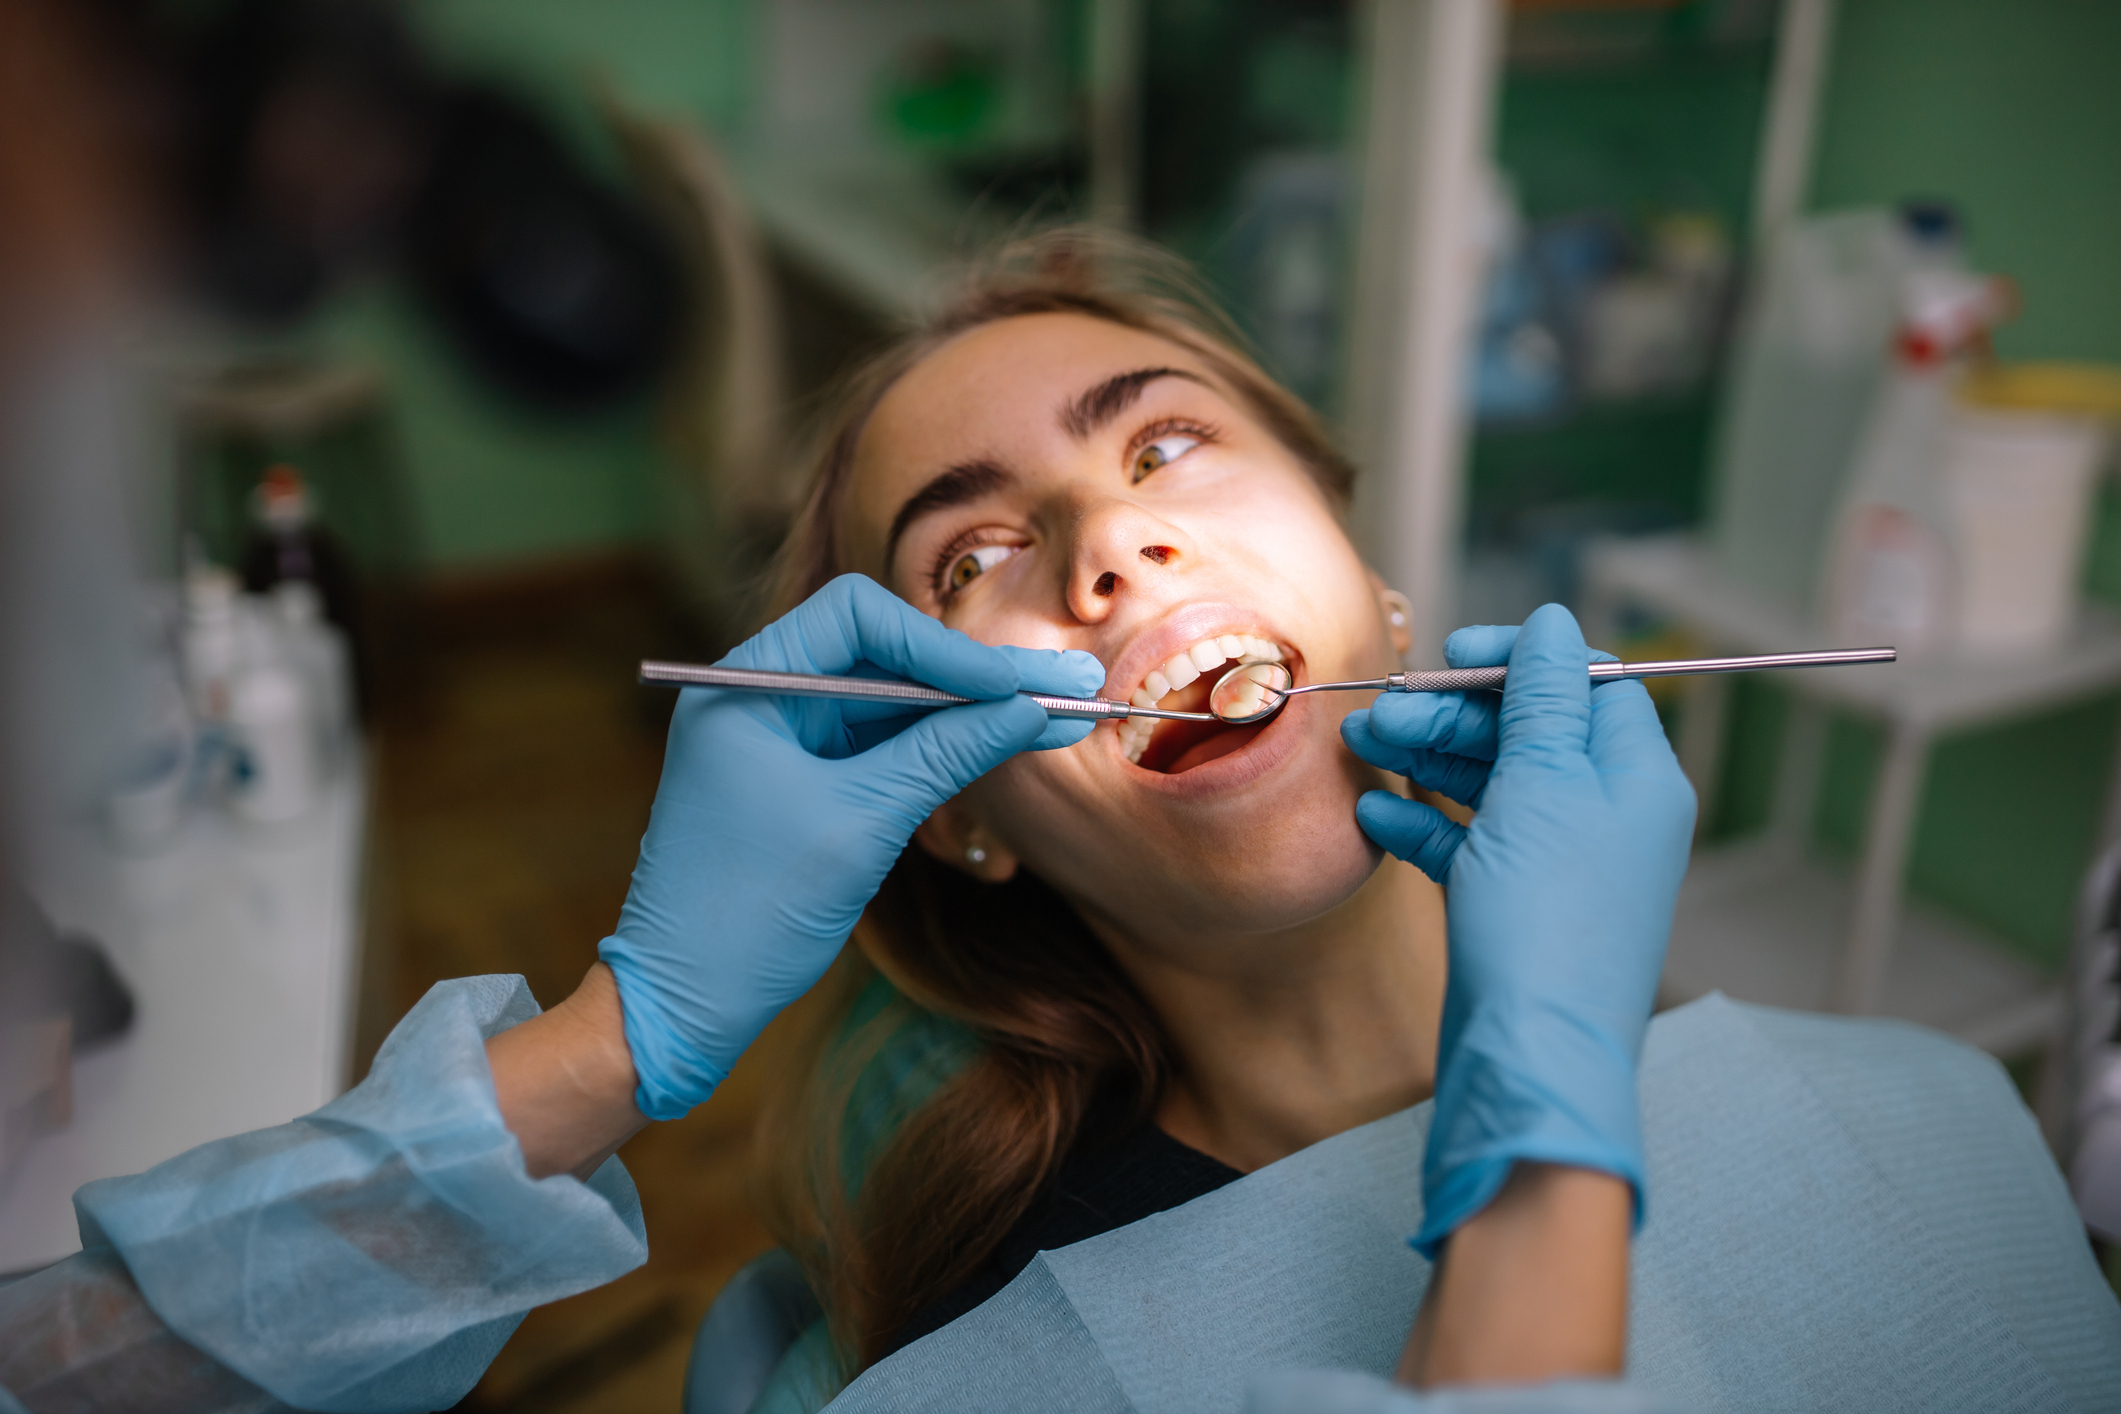 A woman is getting her teeth checked